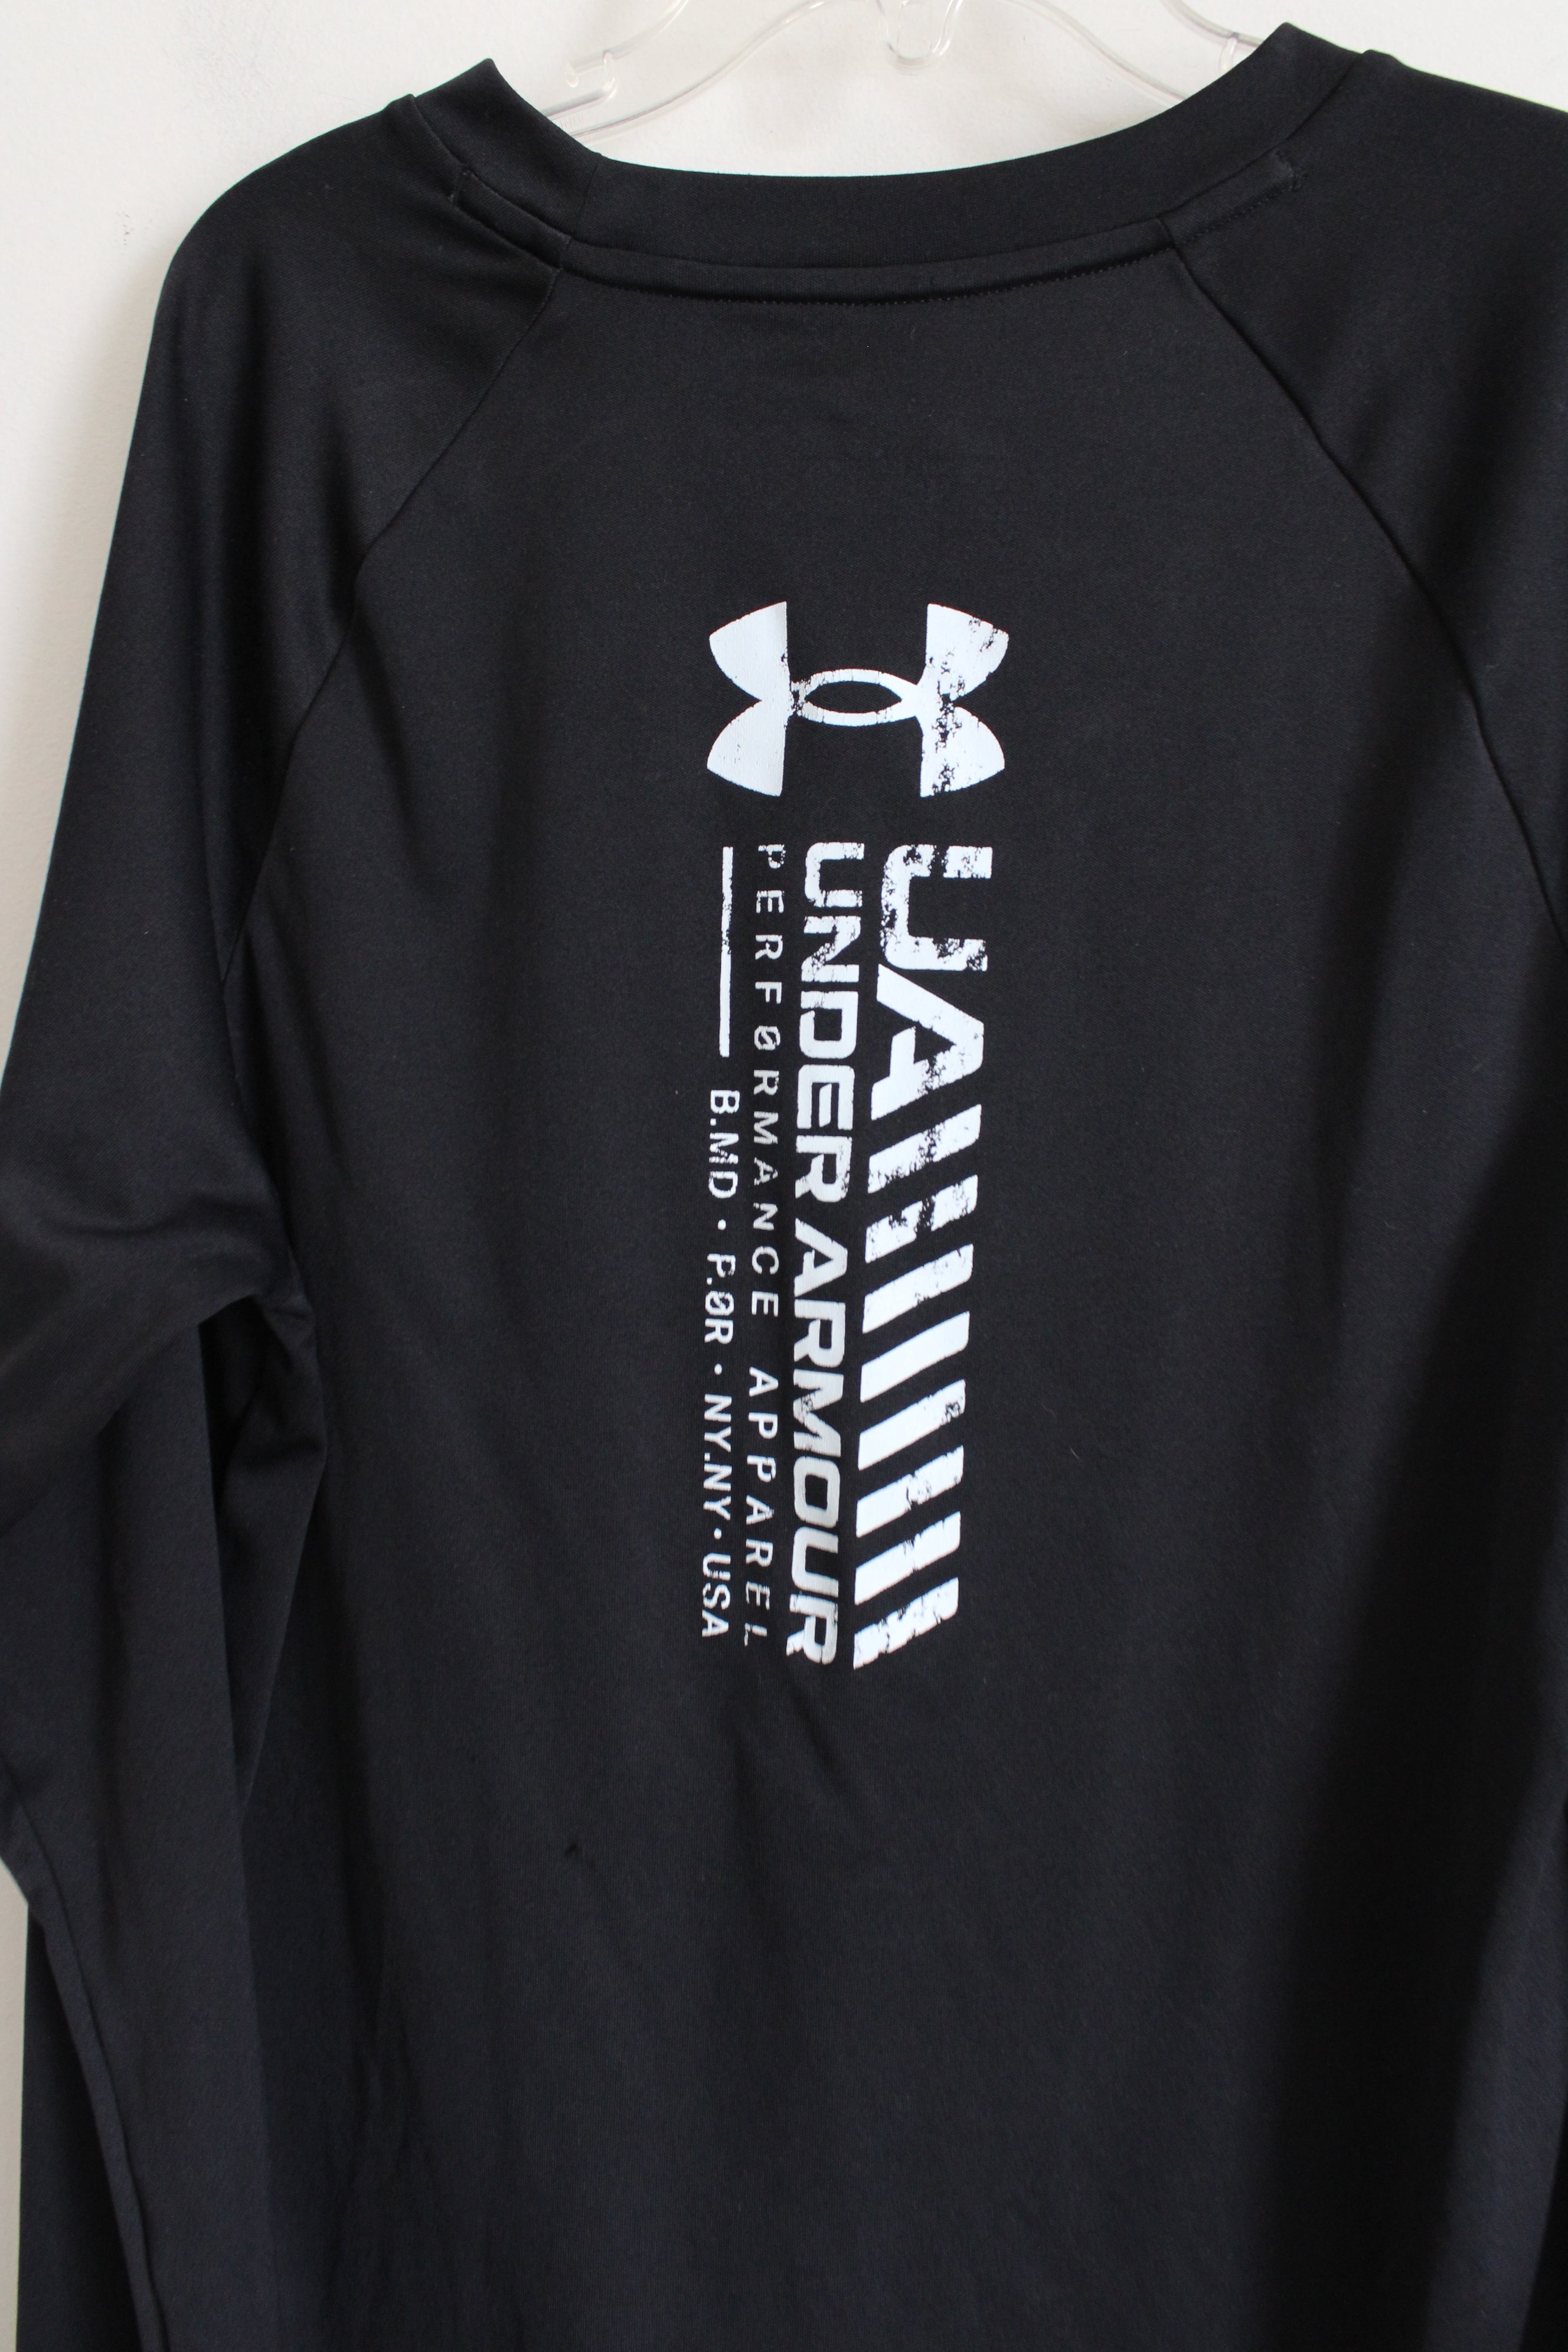 Under Armour Loose Fit Black Long Sleeved Shirt | Youth L (14/16)